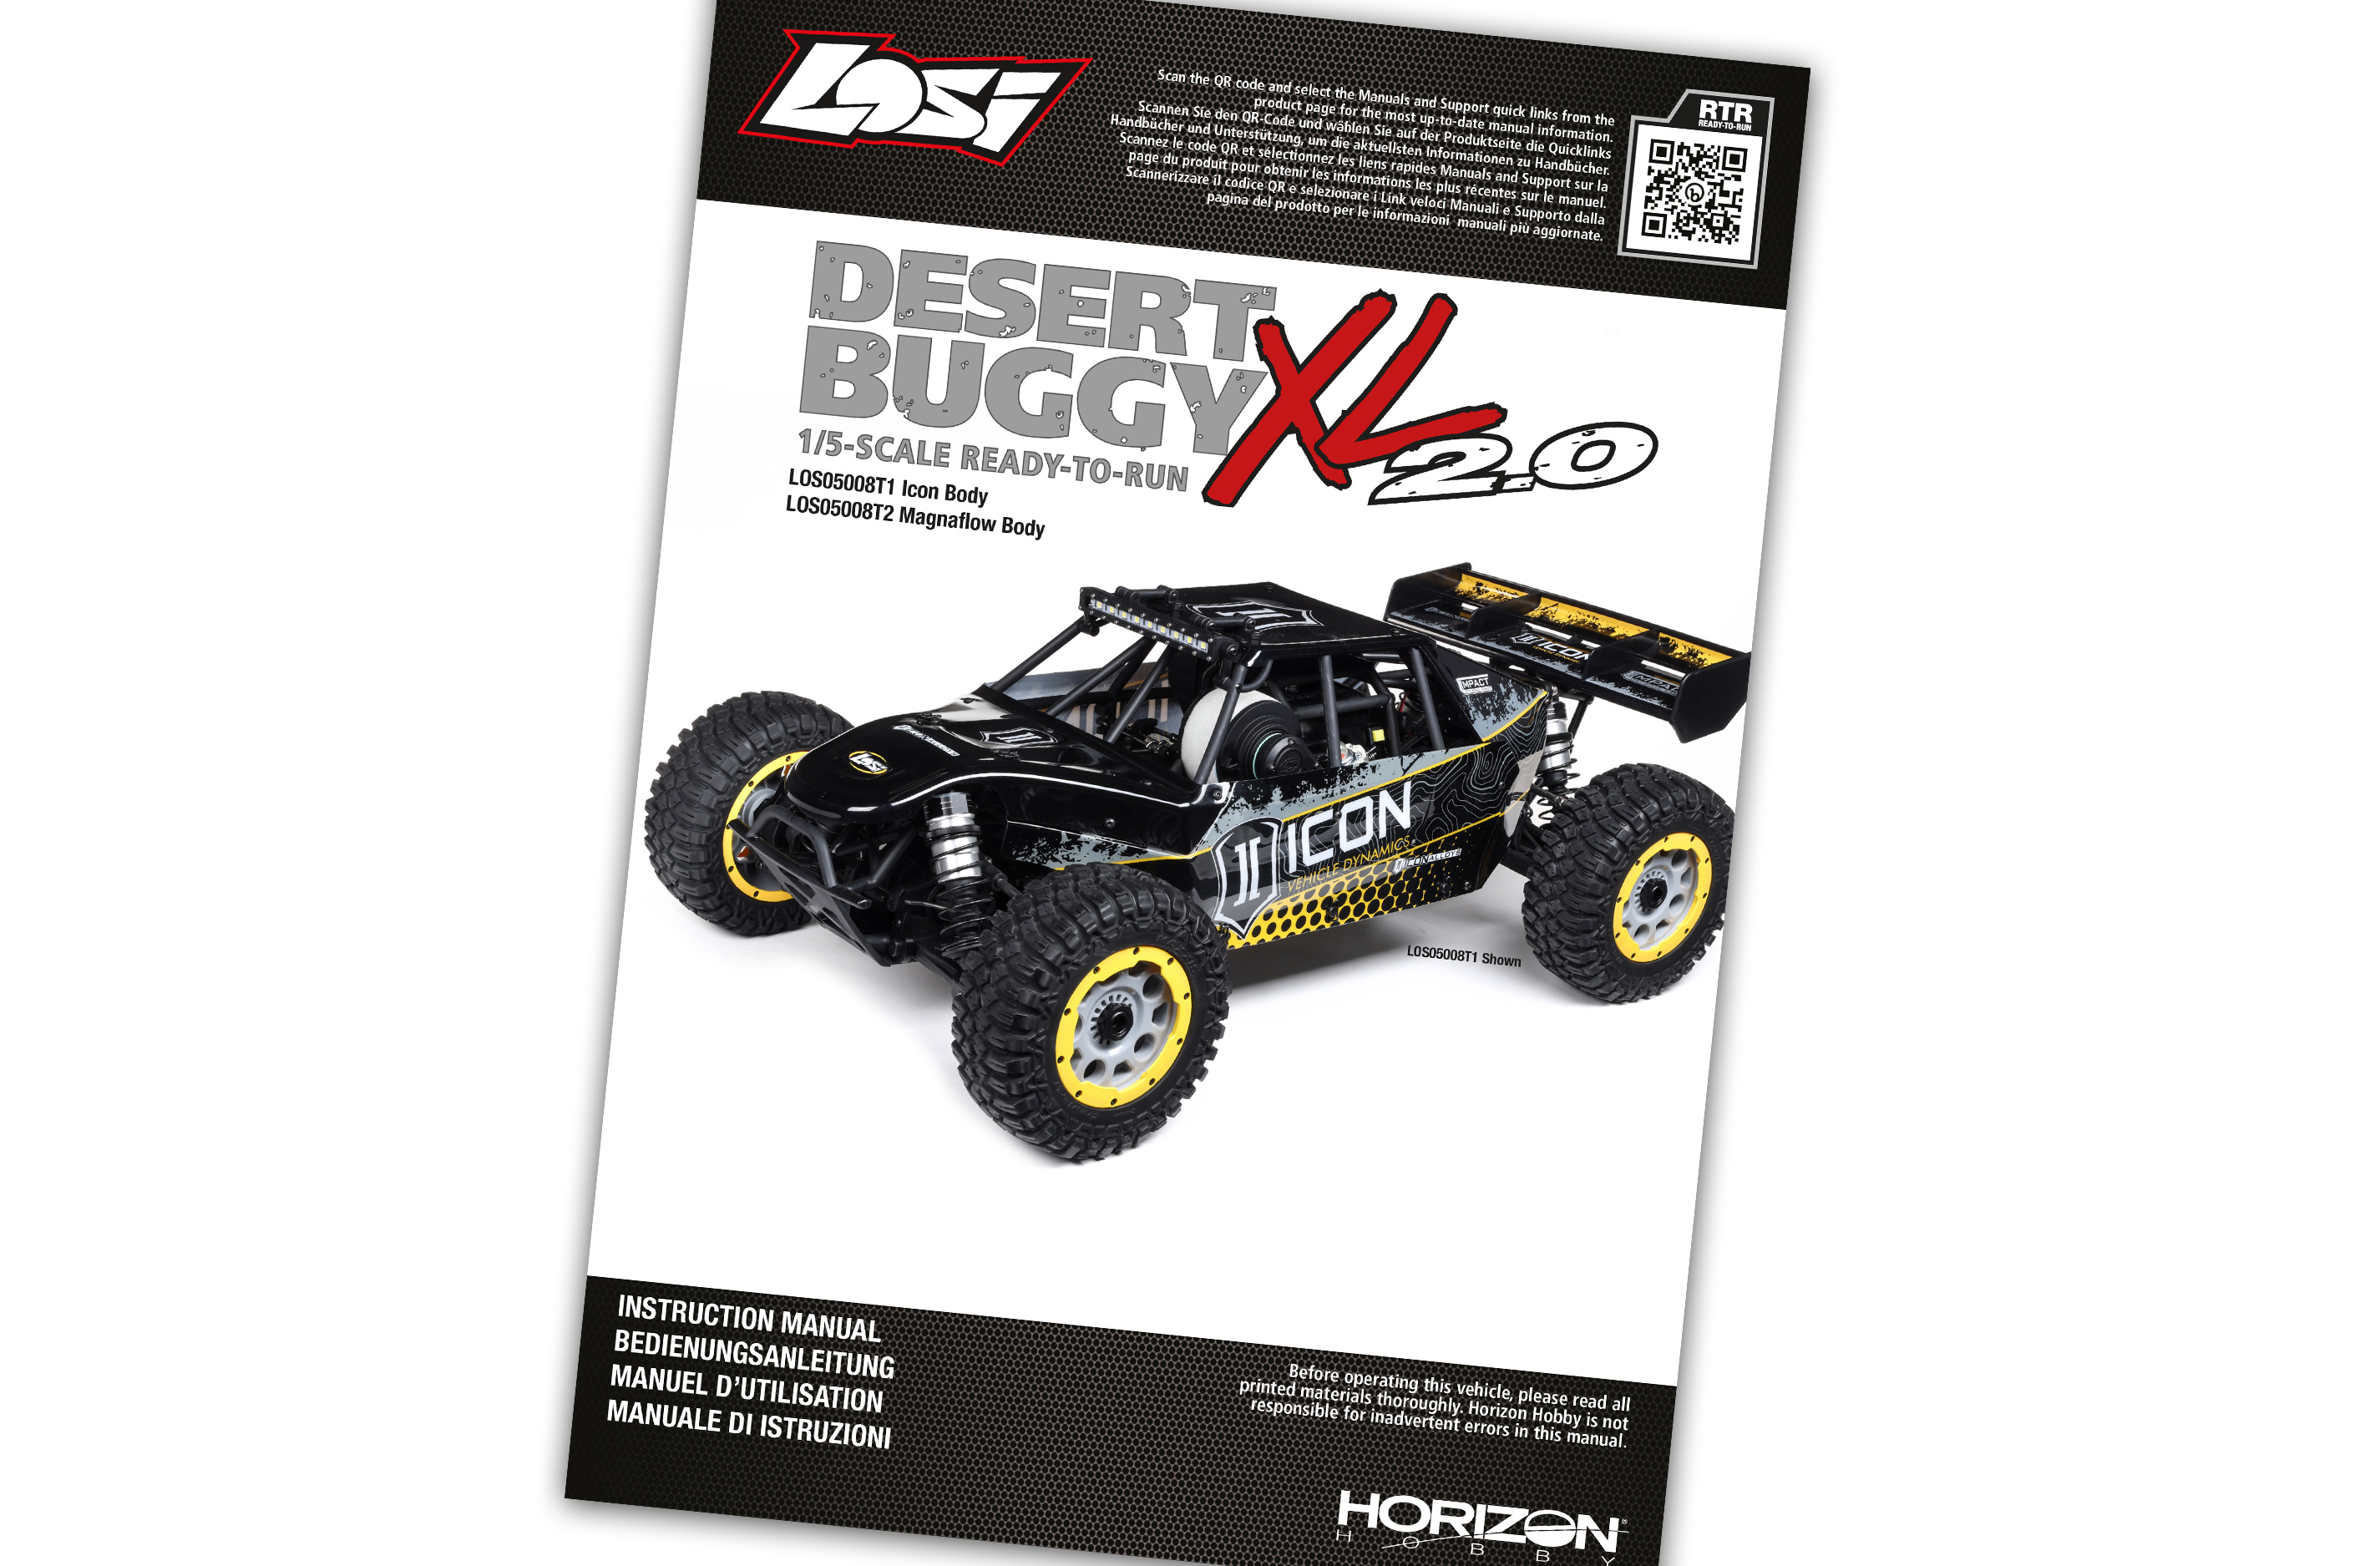 LOS05001/03 Instruction Manual for Desert Buggy XL 2.0